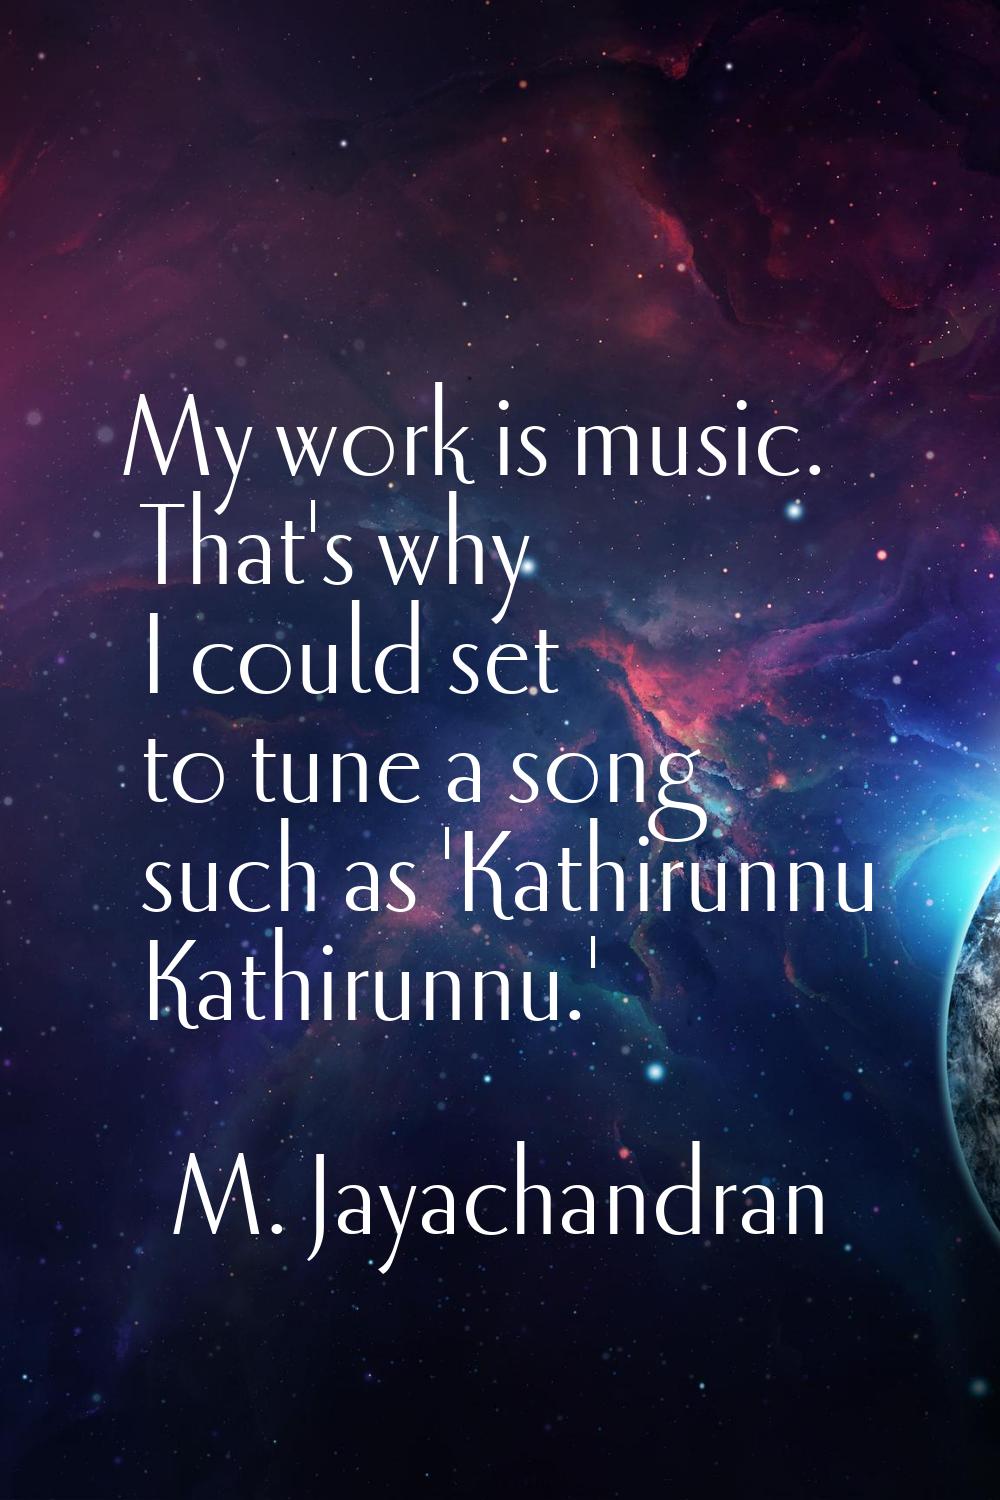 My work is music. That's why I could set to tune a song such as 'Kathirunnu Kathirunnu.'